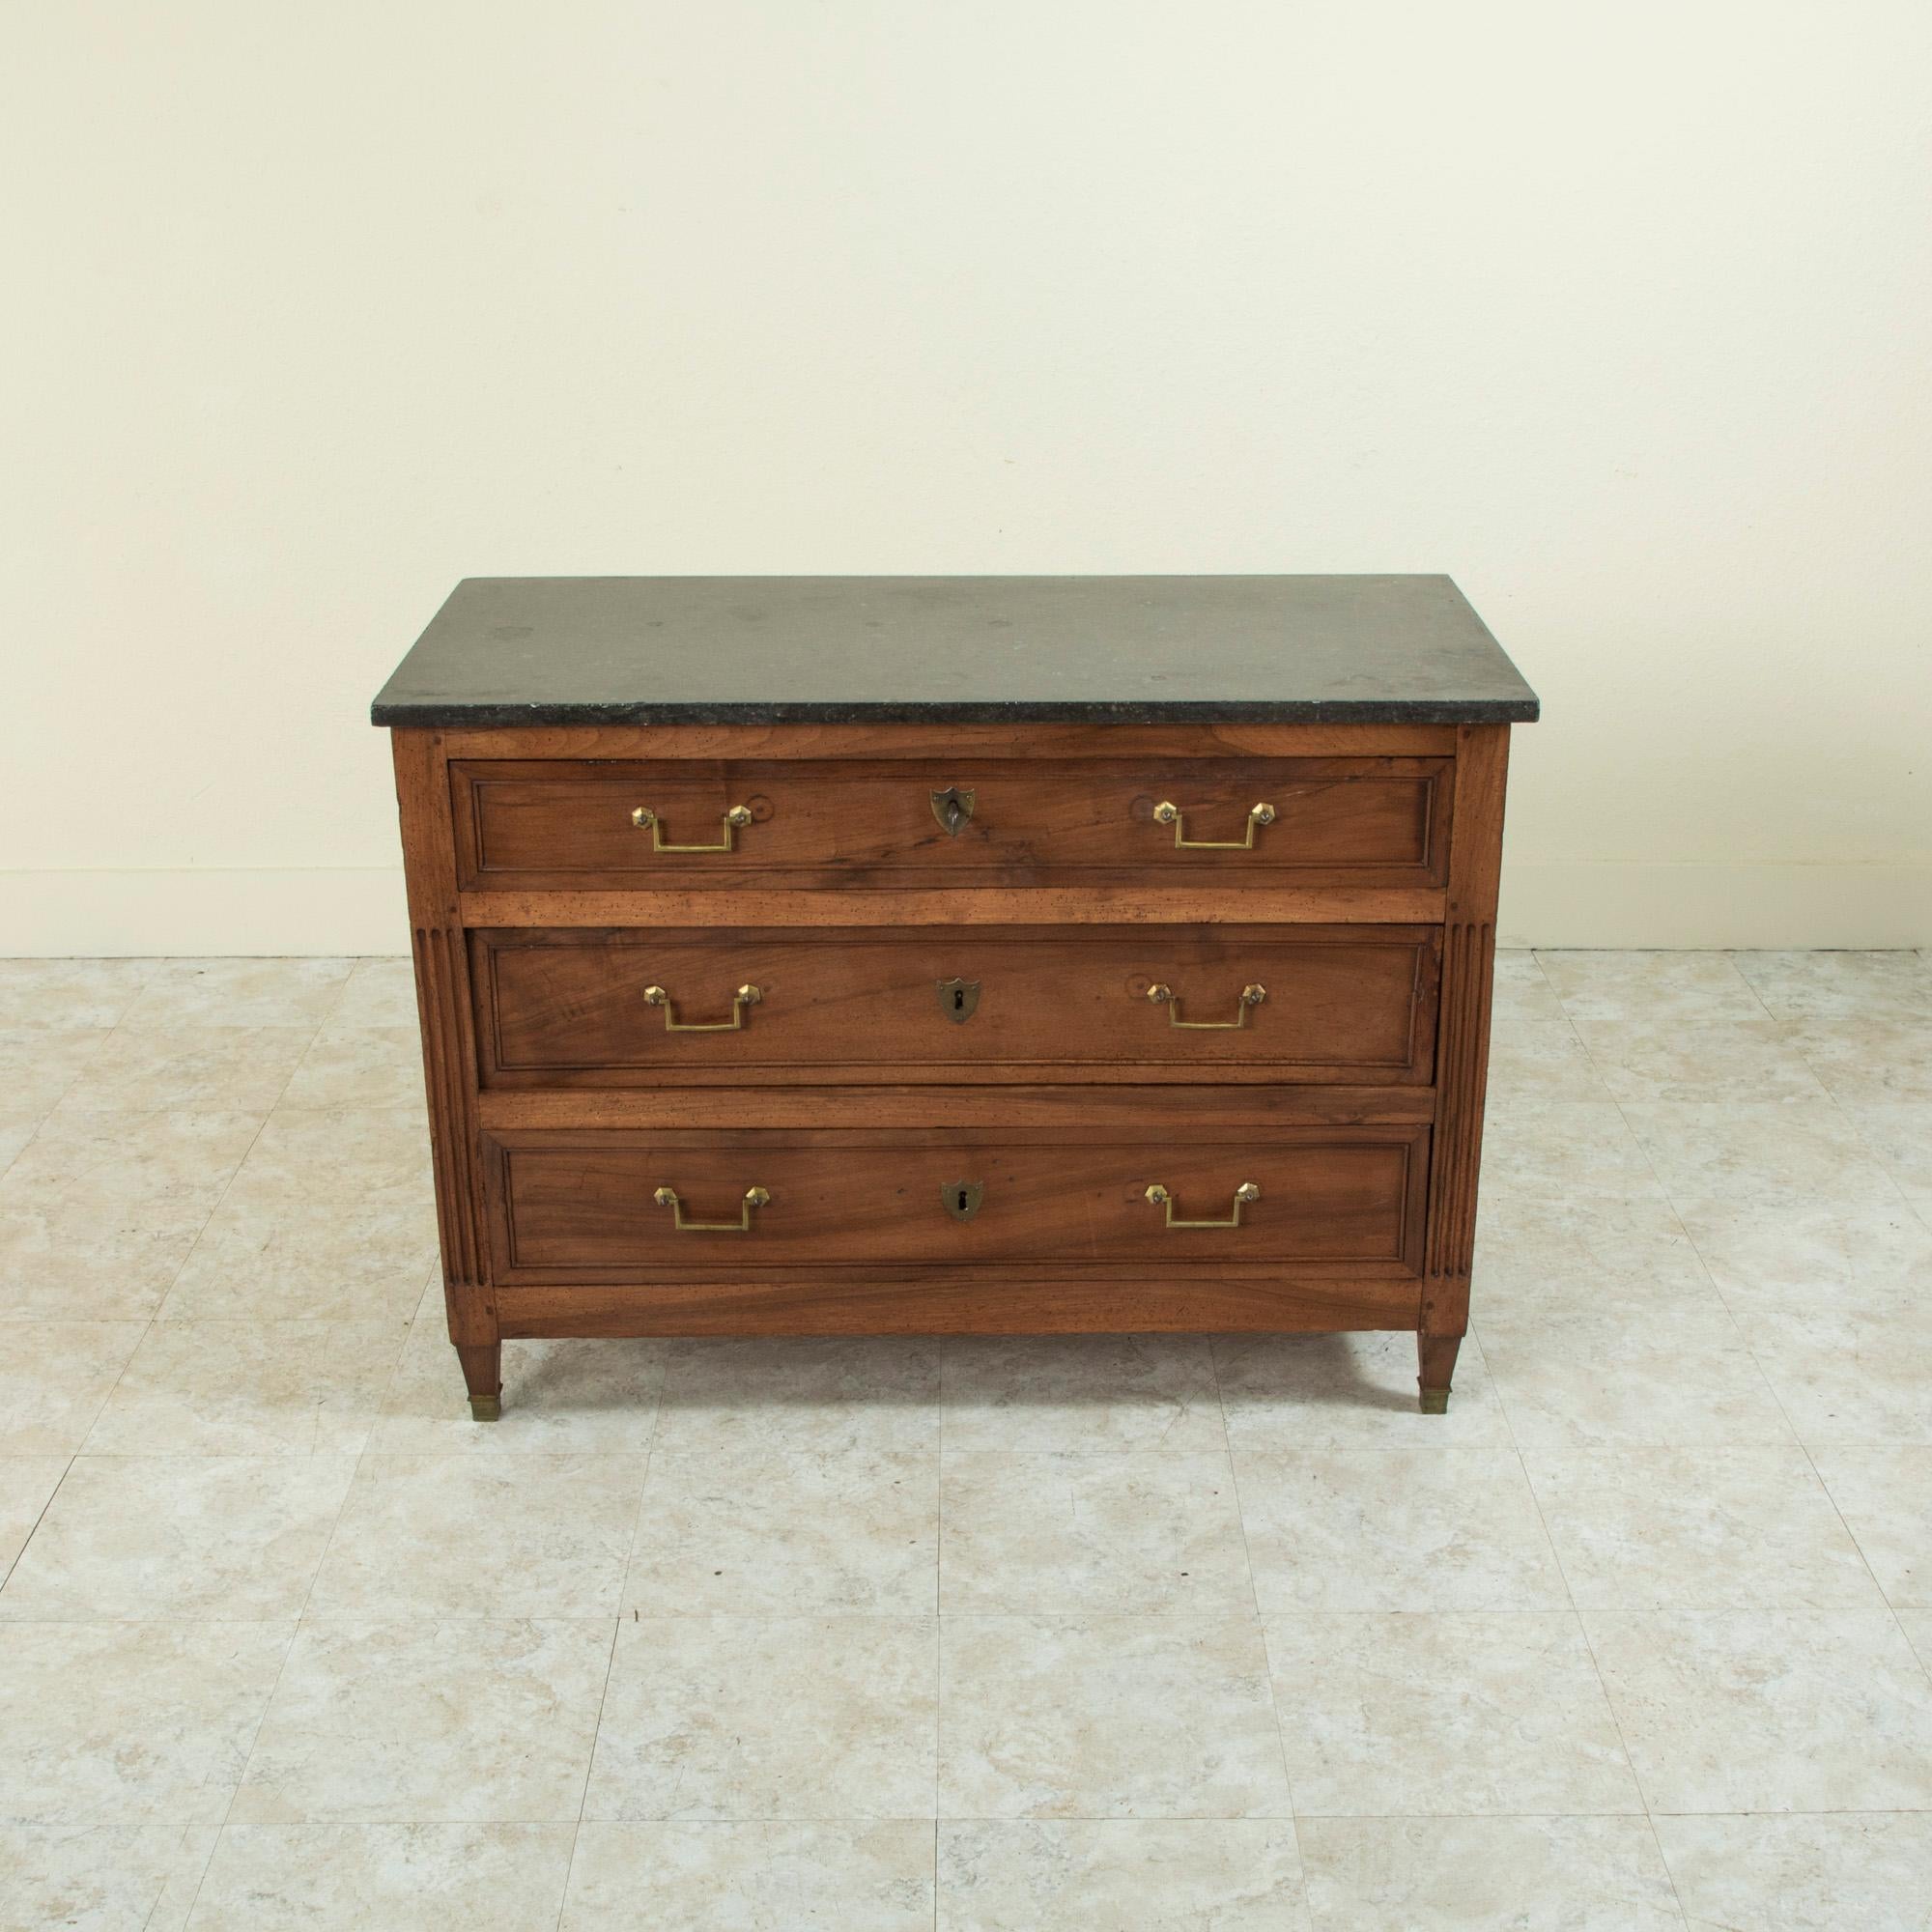 This late eighteenth century French Louis XVI period walnut commode or chest of drawers features a black marble top. The corners are detailed with hand carved fluting and terminate in tapered square legs finished with bronze sabots. Its three